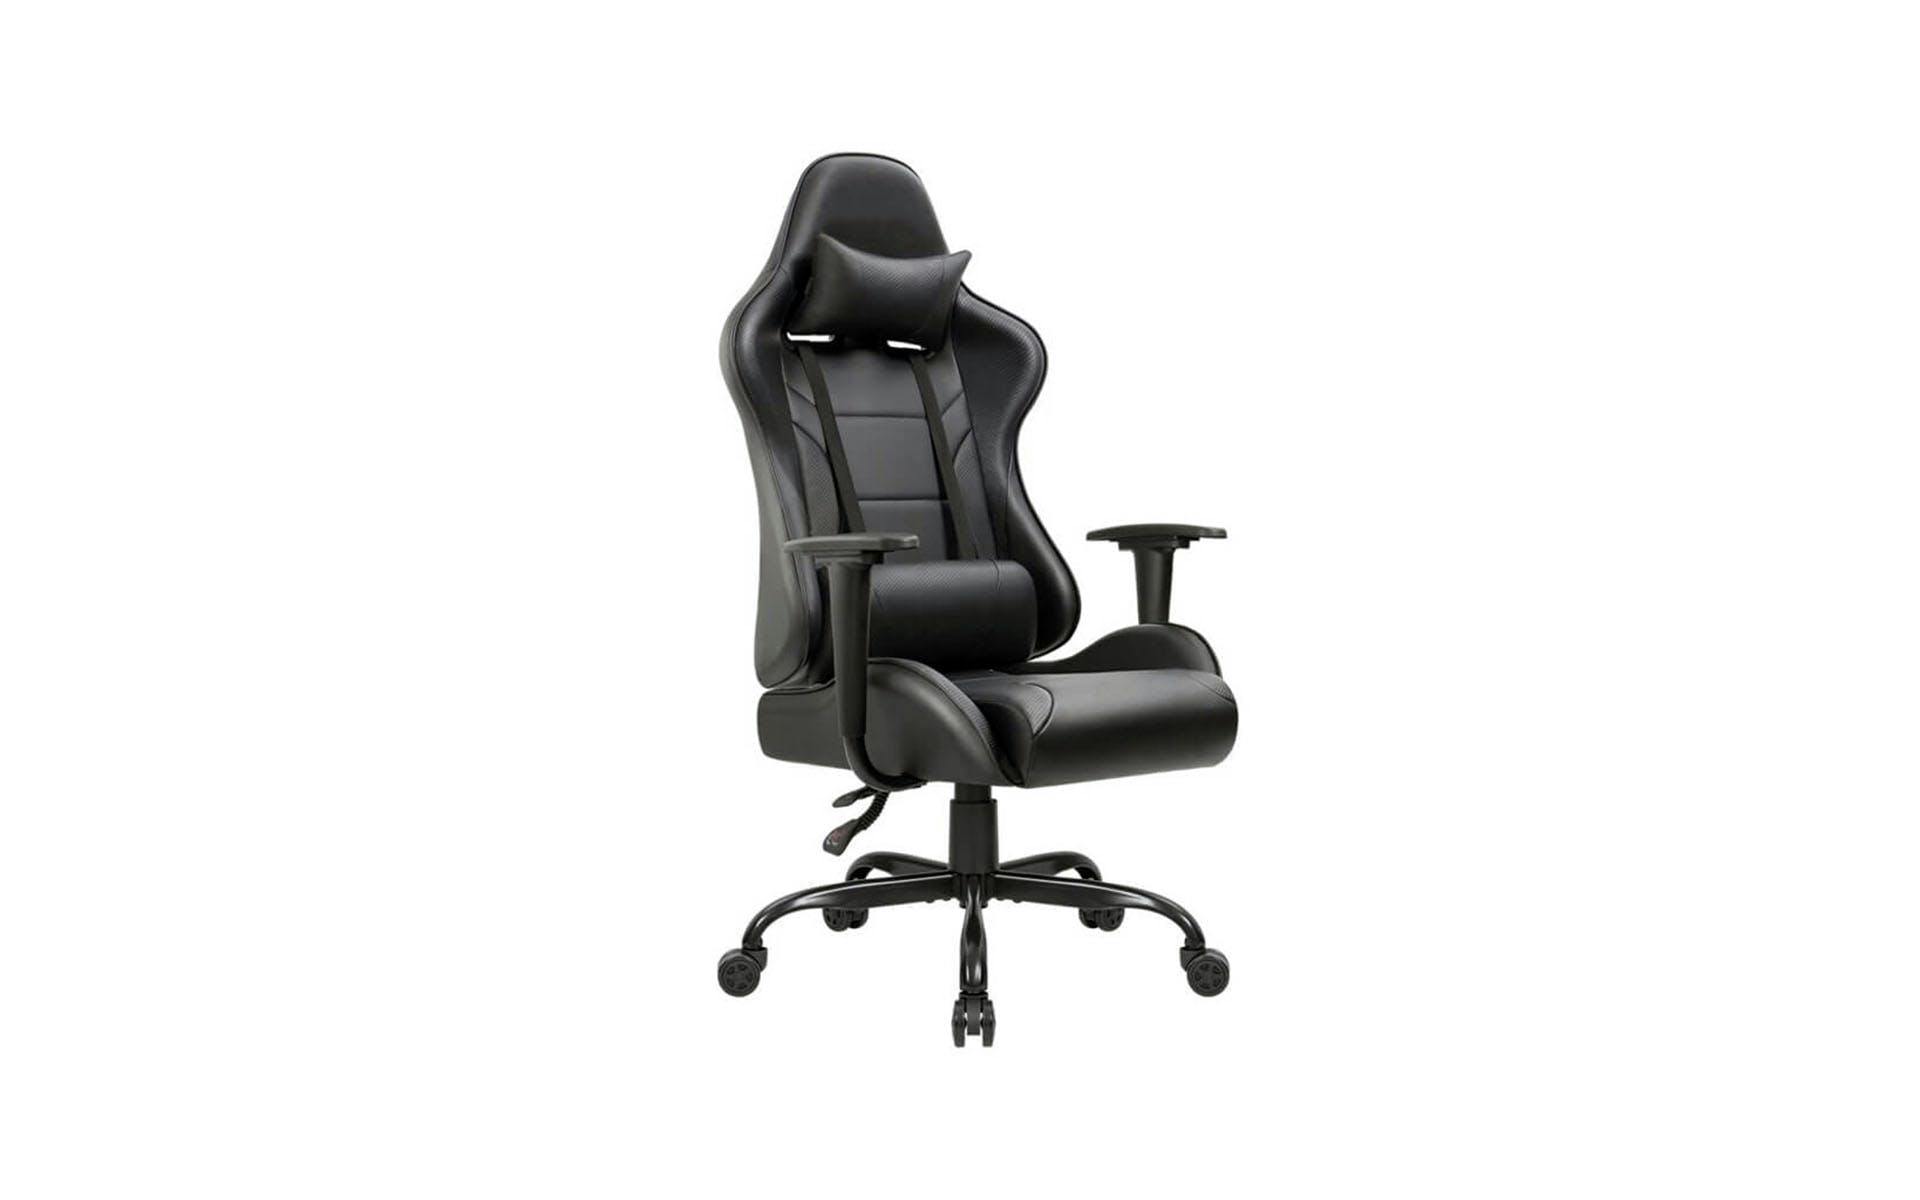 Pitch black gaming chair with a wide seat